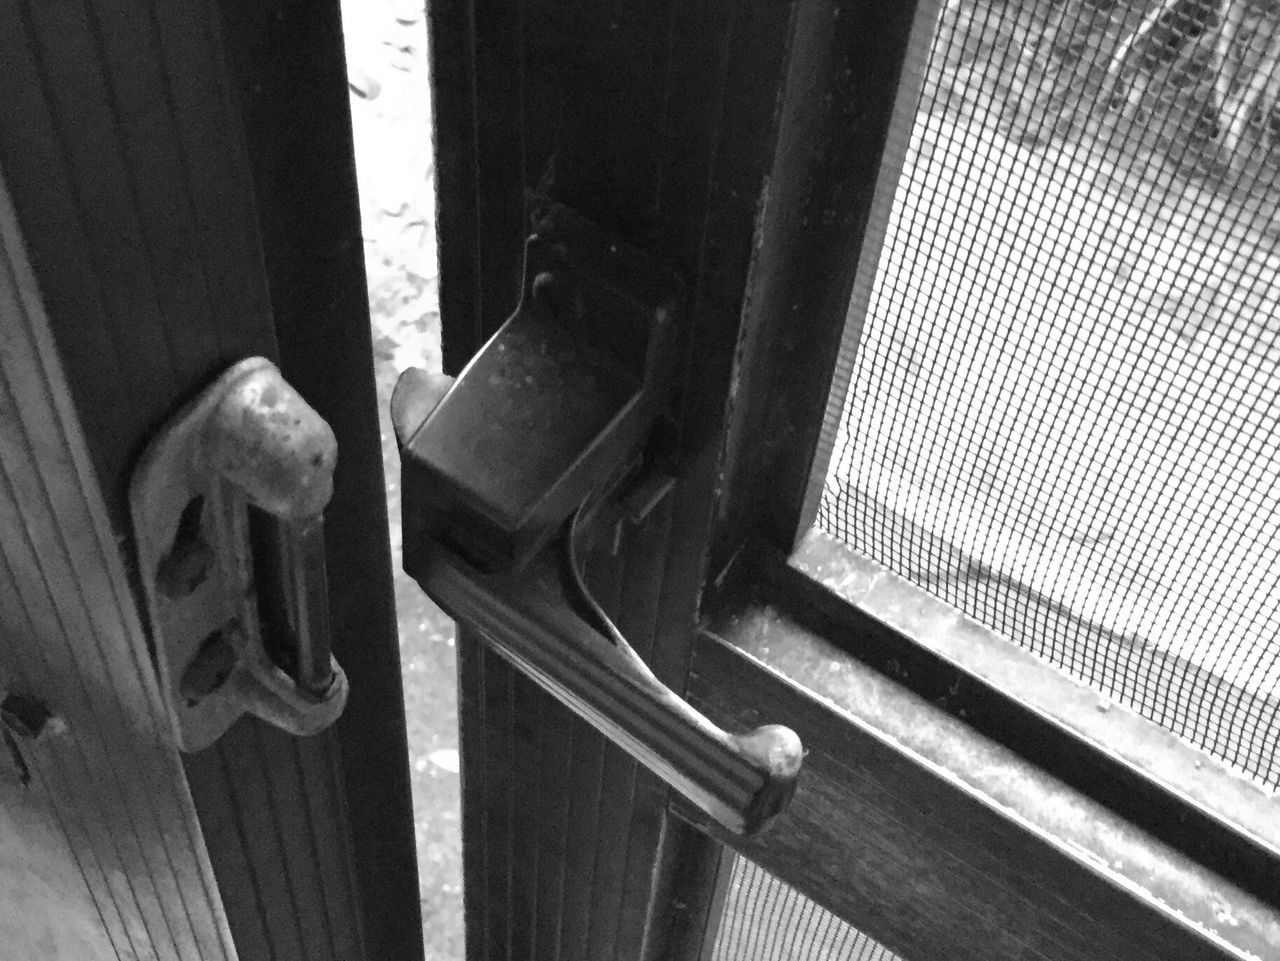 door, entrance, safety, metal, protection, security, no people, close-up, indoors, closed, lock, wood - material, day, open, knob, doorknob, handle, latch, pattern